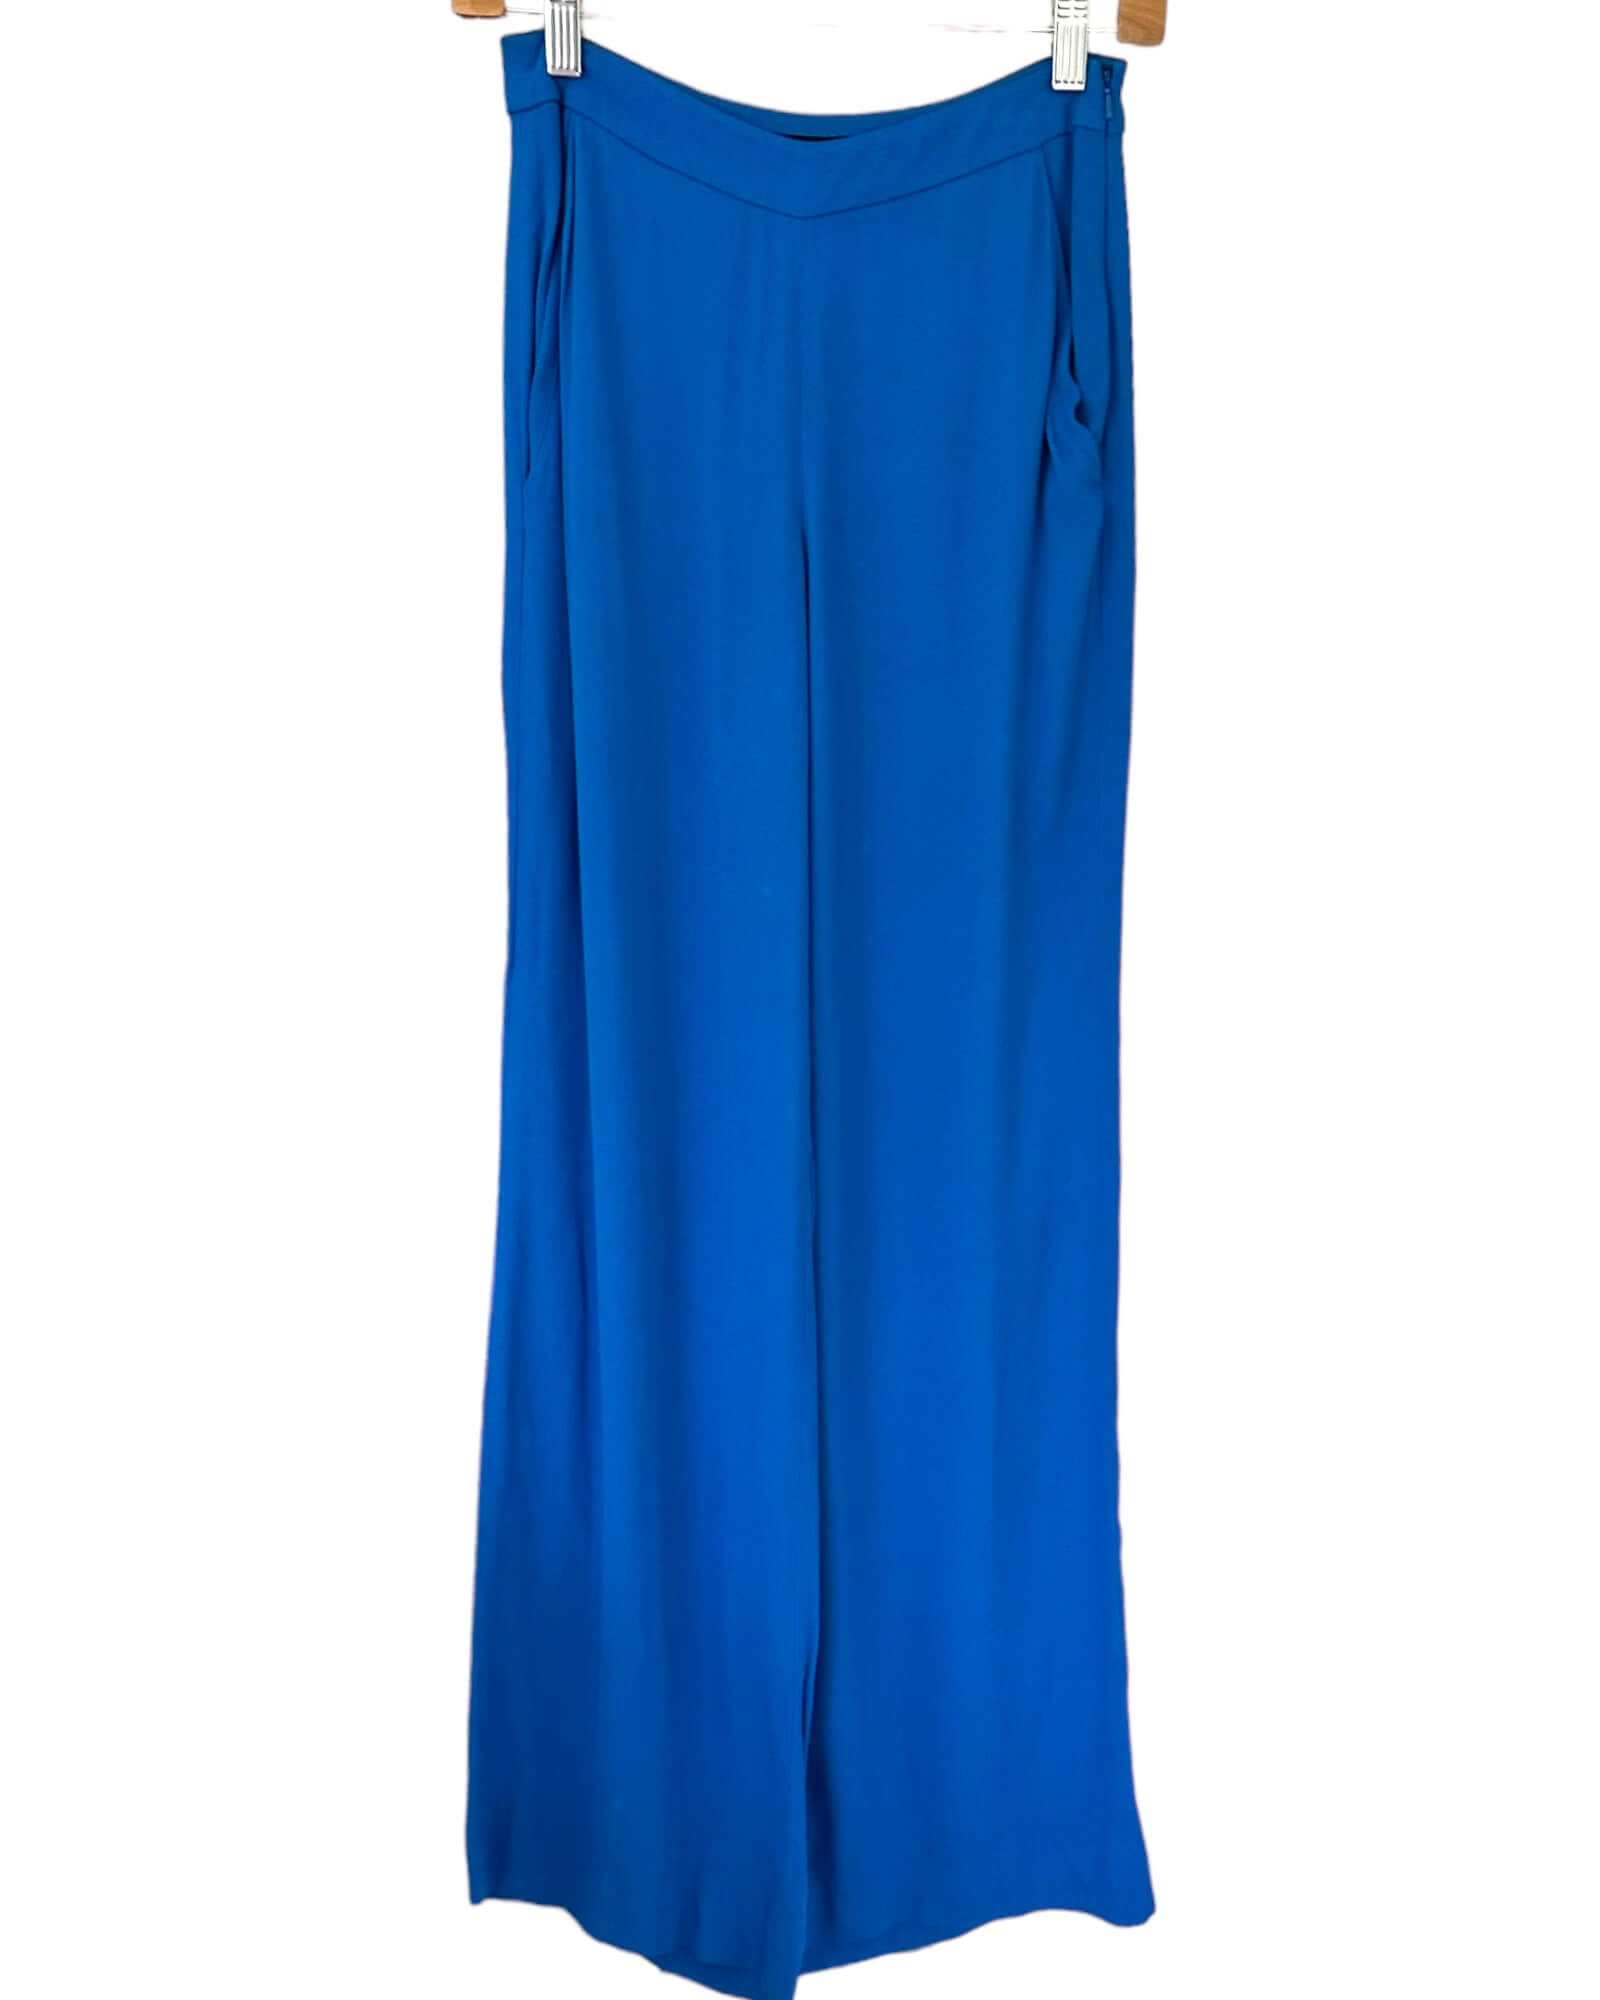 Light Spring FRENCH CONNECTION regatta blue wide leg pant